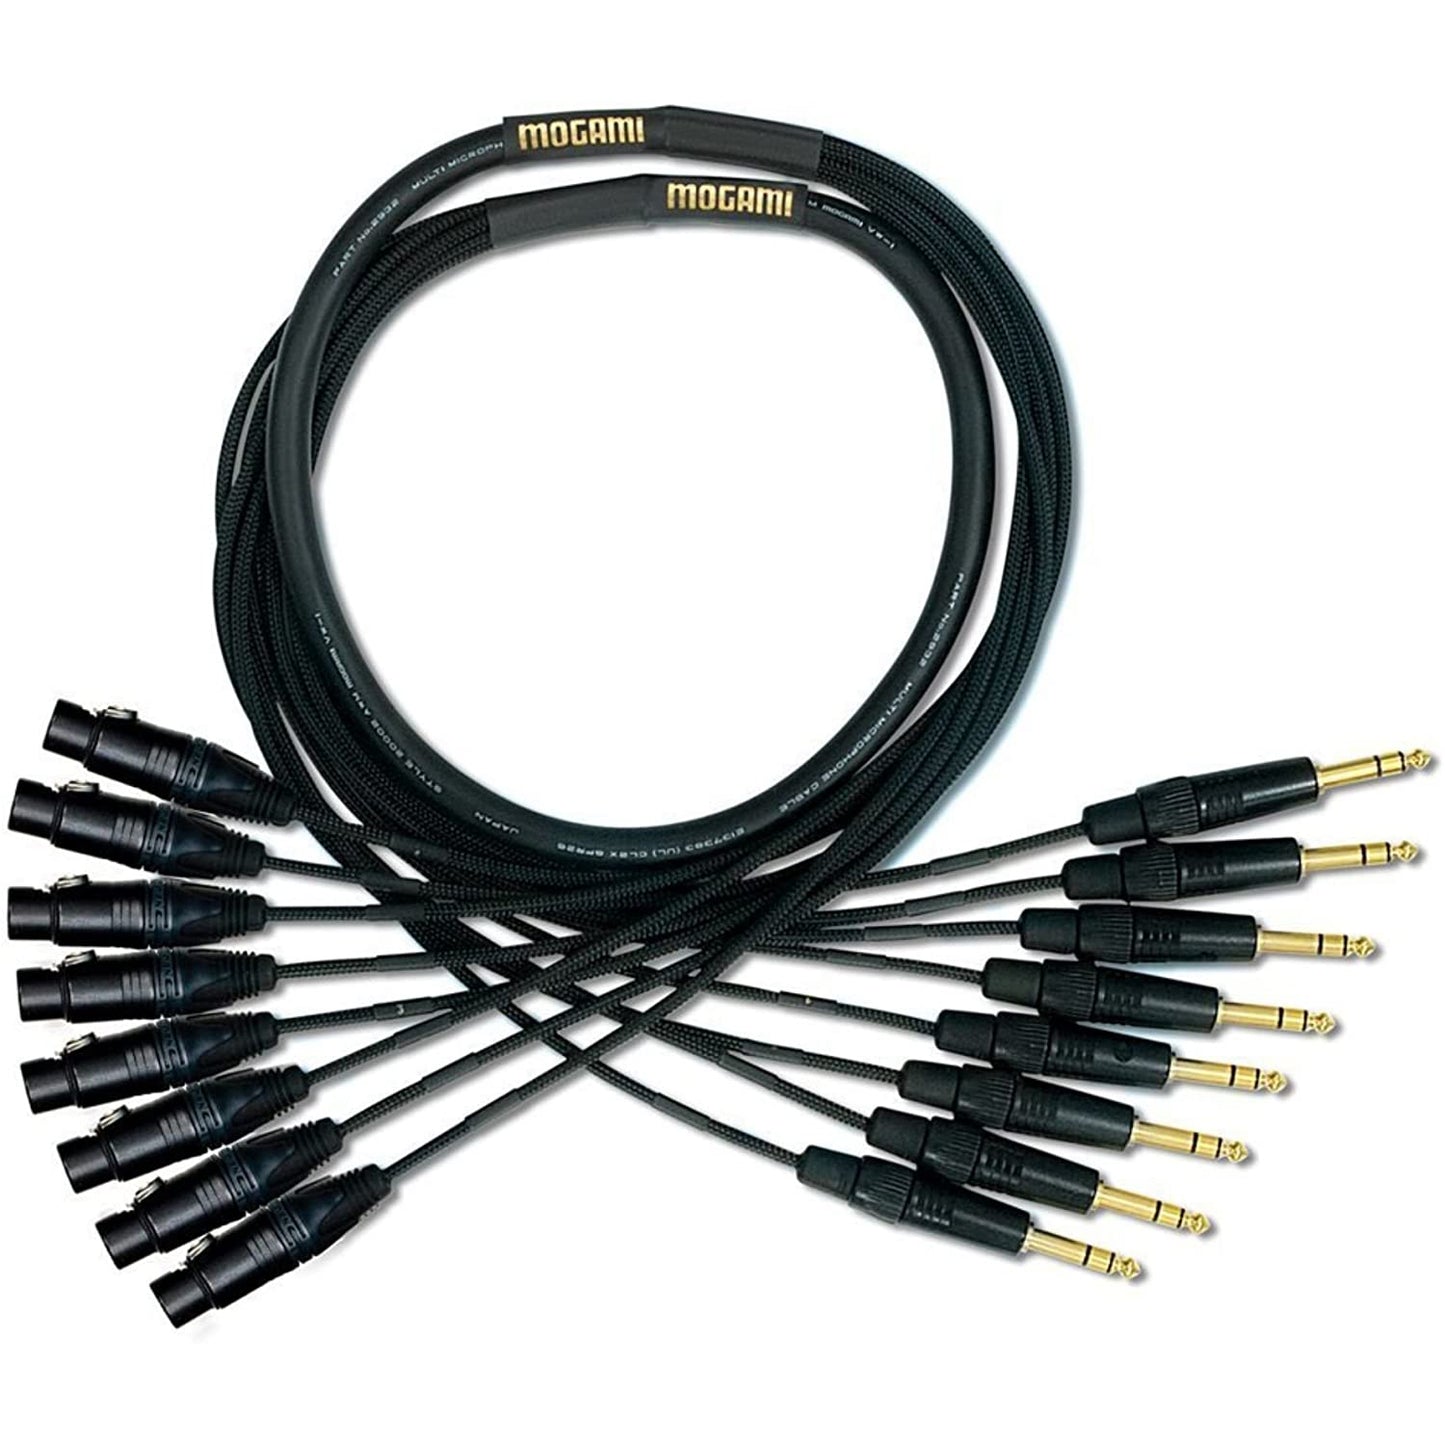 Mogami Gold 8 Channel Analog Snake Cable, 8x 1/4" TRS Male/8x XLR Female - 15'